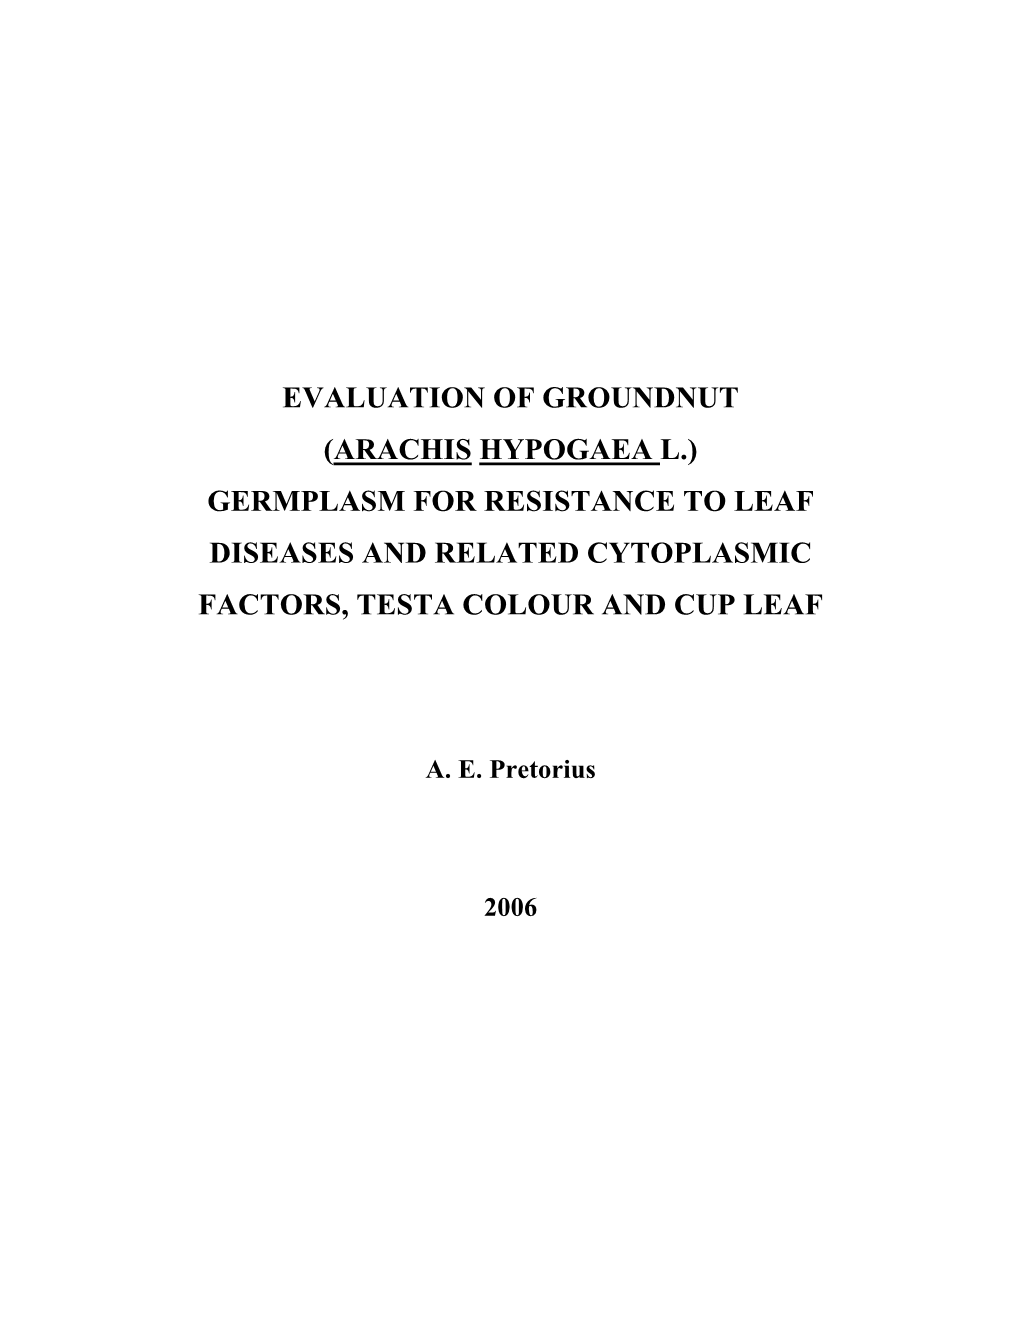 Evaluation of Groundnut (Arachis Hypogaea L.) Germplasm for Resistance to Leaf Diseases and Related Cytoplasmic Factors, Testa Colour and Cup Leaf